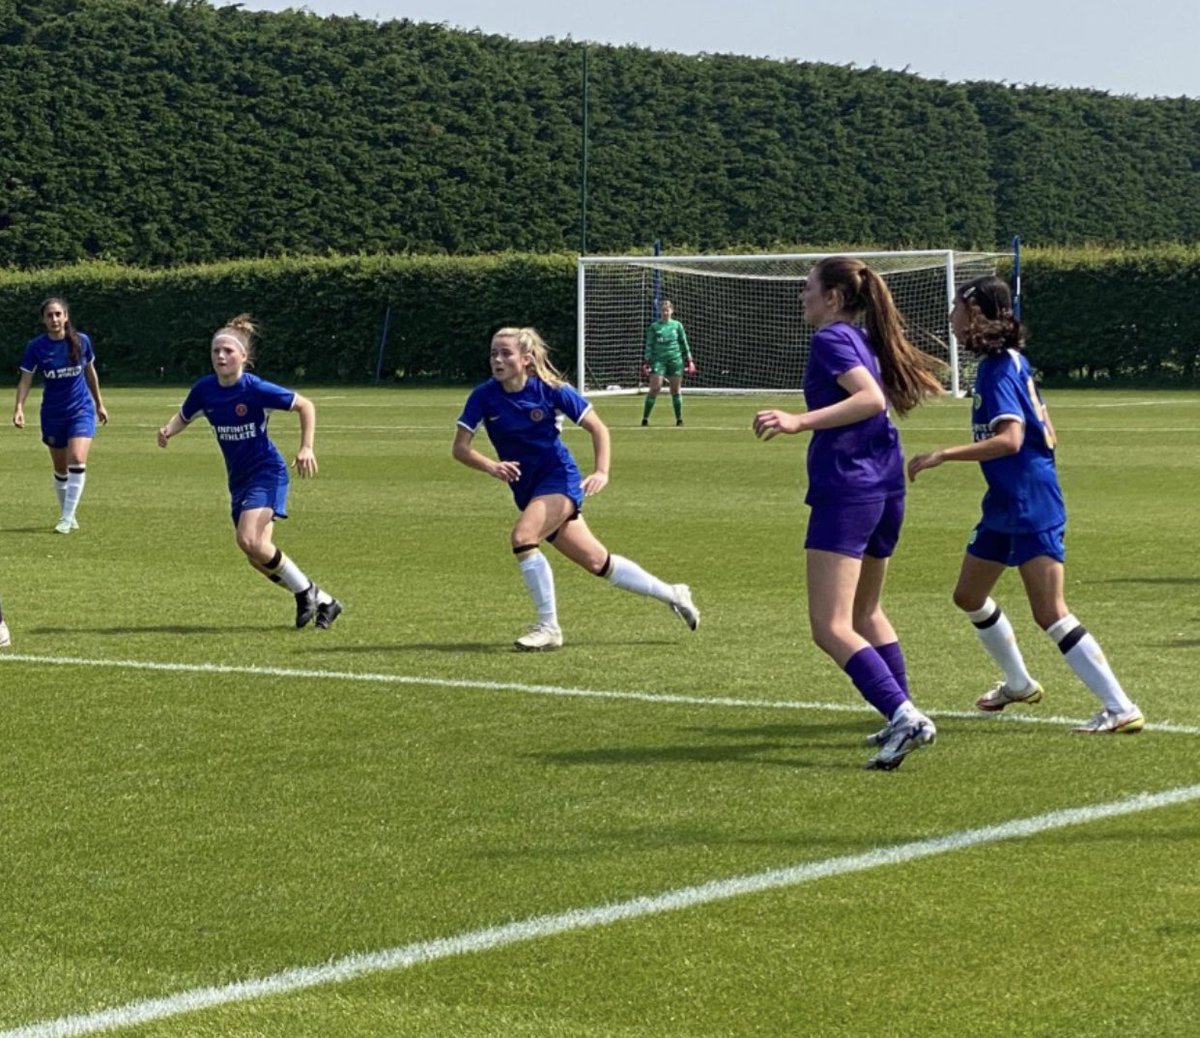 Fantastic Experience for our 2 @Mount_Kelly Girl Footballers…. Training & Playing for #ChelseaU18Girls Last Week #Sariyah and #Erin 💙💙🤍⚽️ Well Deserved With Both Girls Dedicated And Wanting To Improve Every Day 👊🏼 Opportunities Created At Our @MountKellyFooty Programme